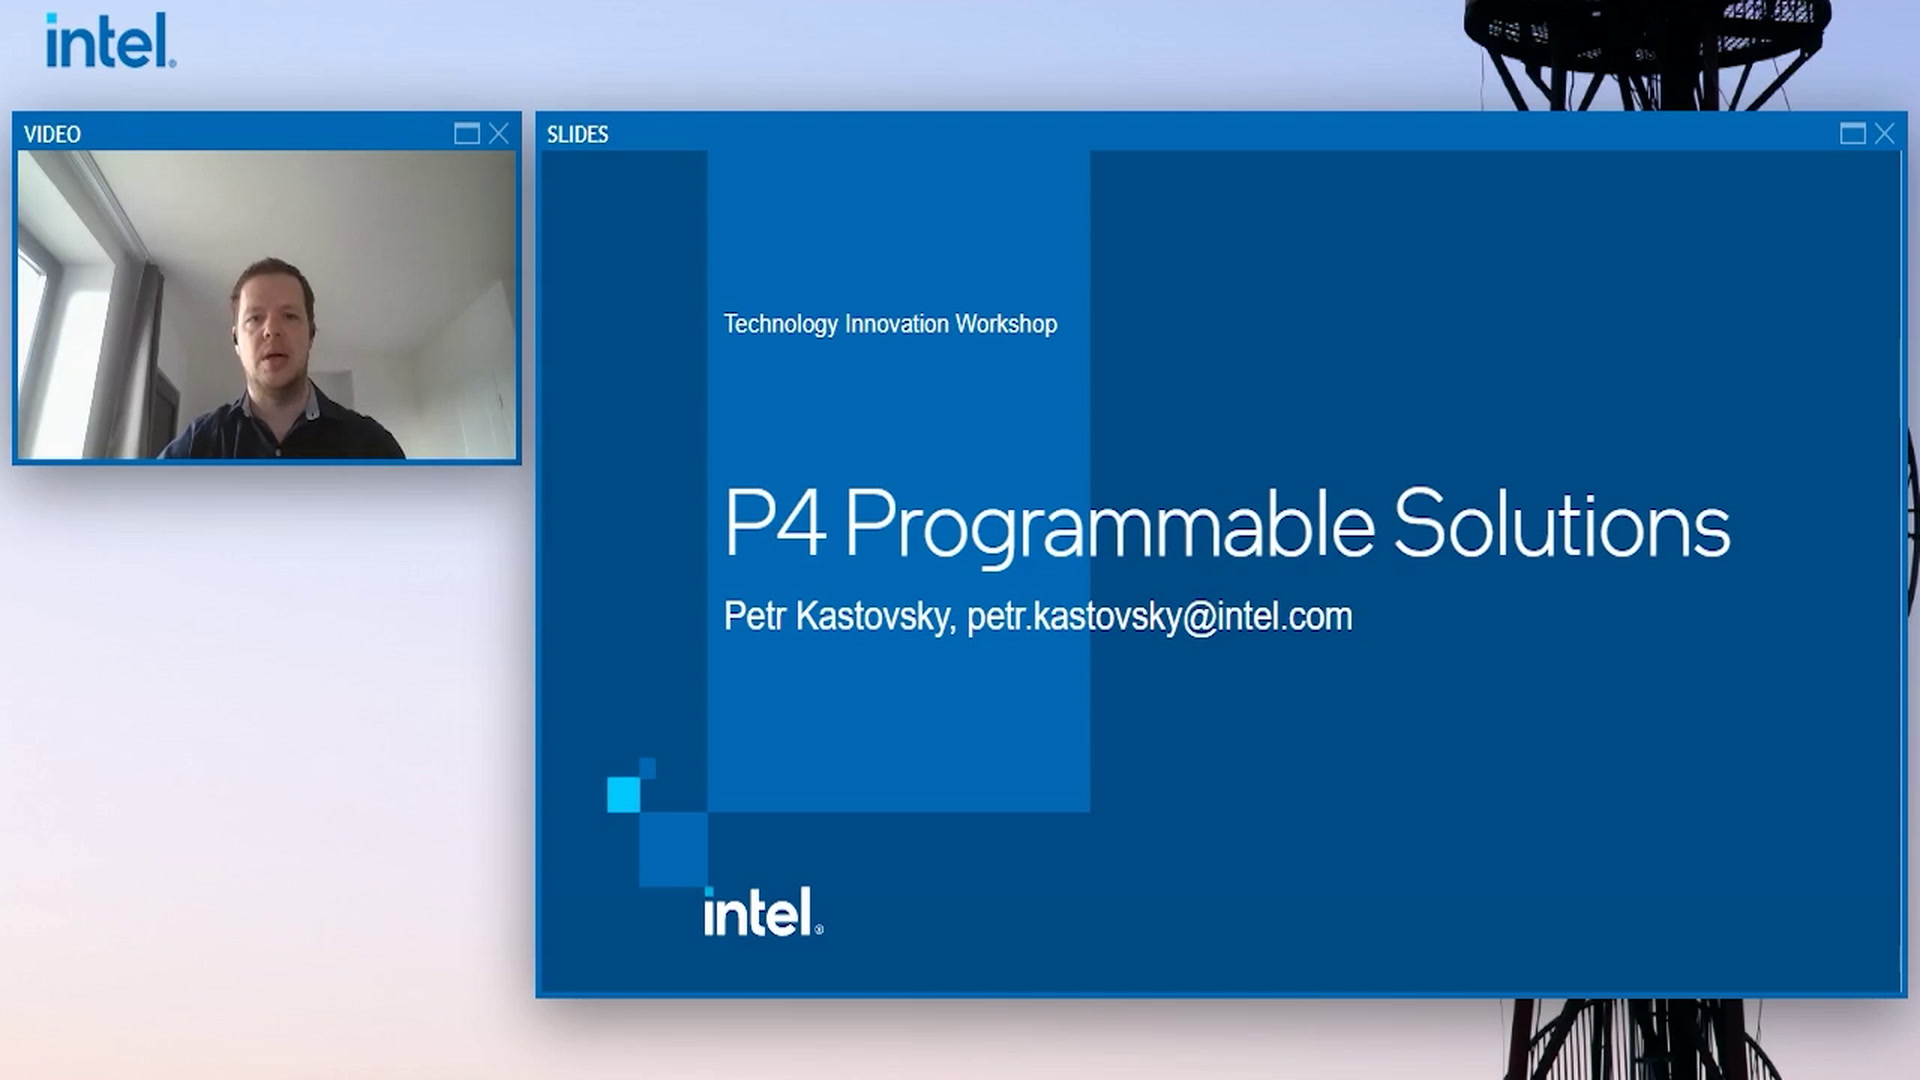 P4 Programmable Solutions